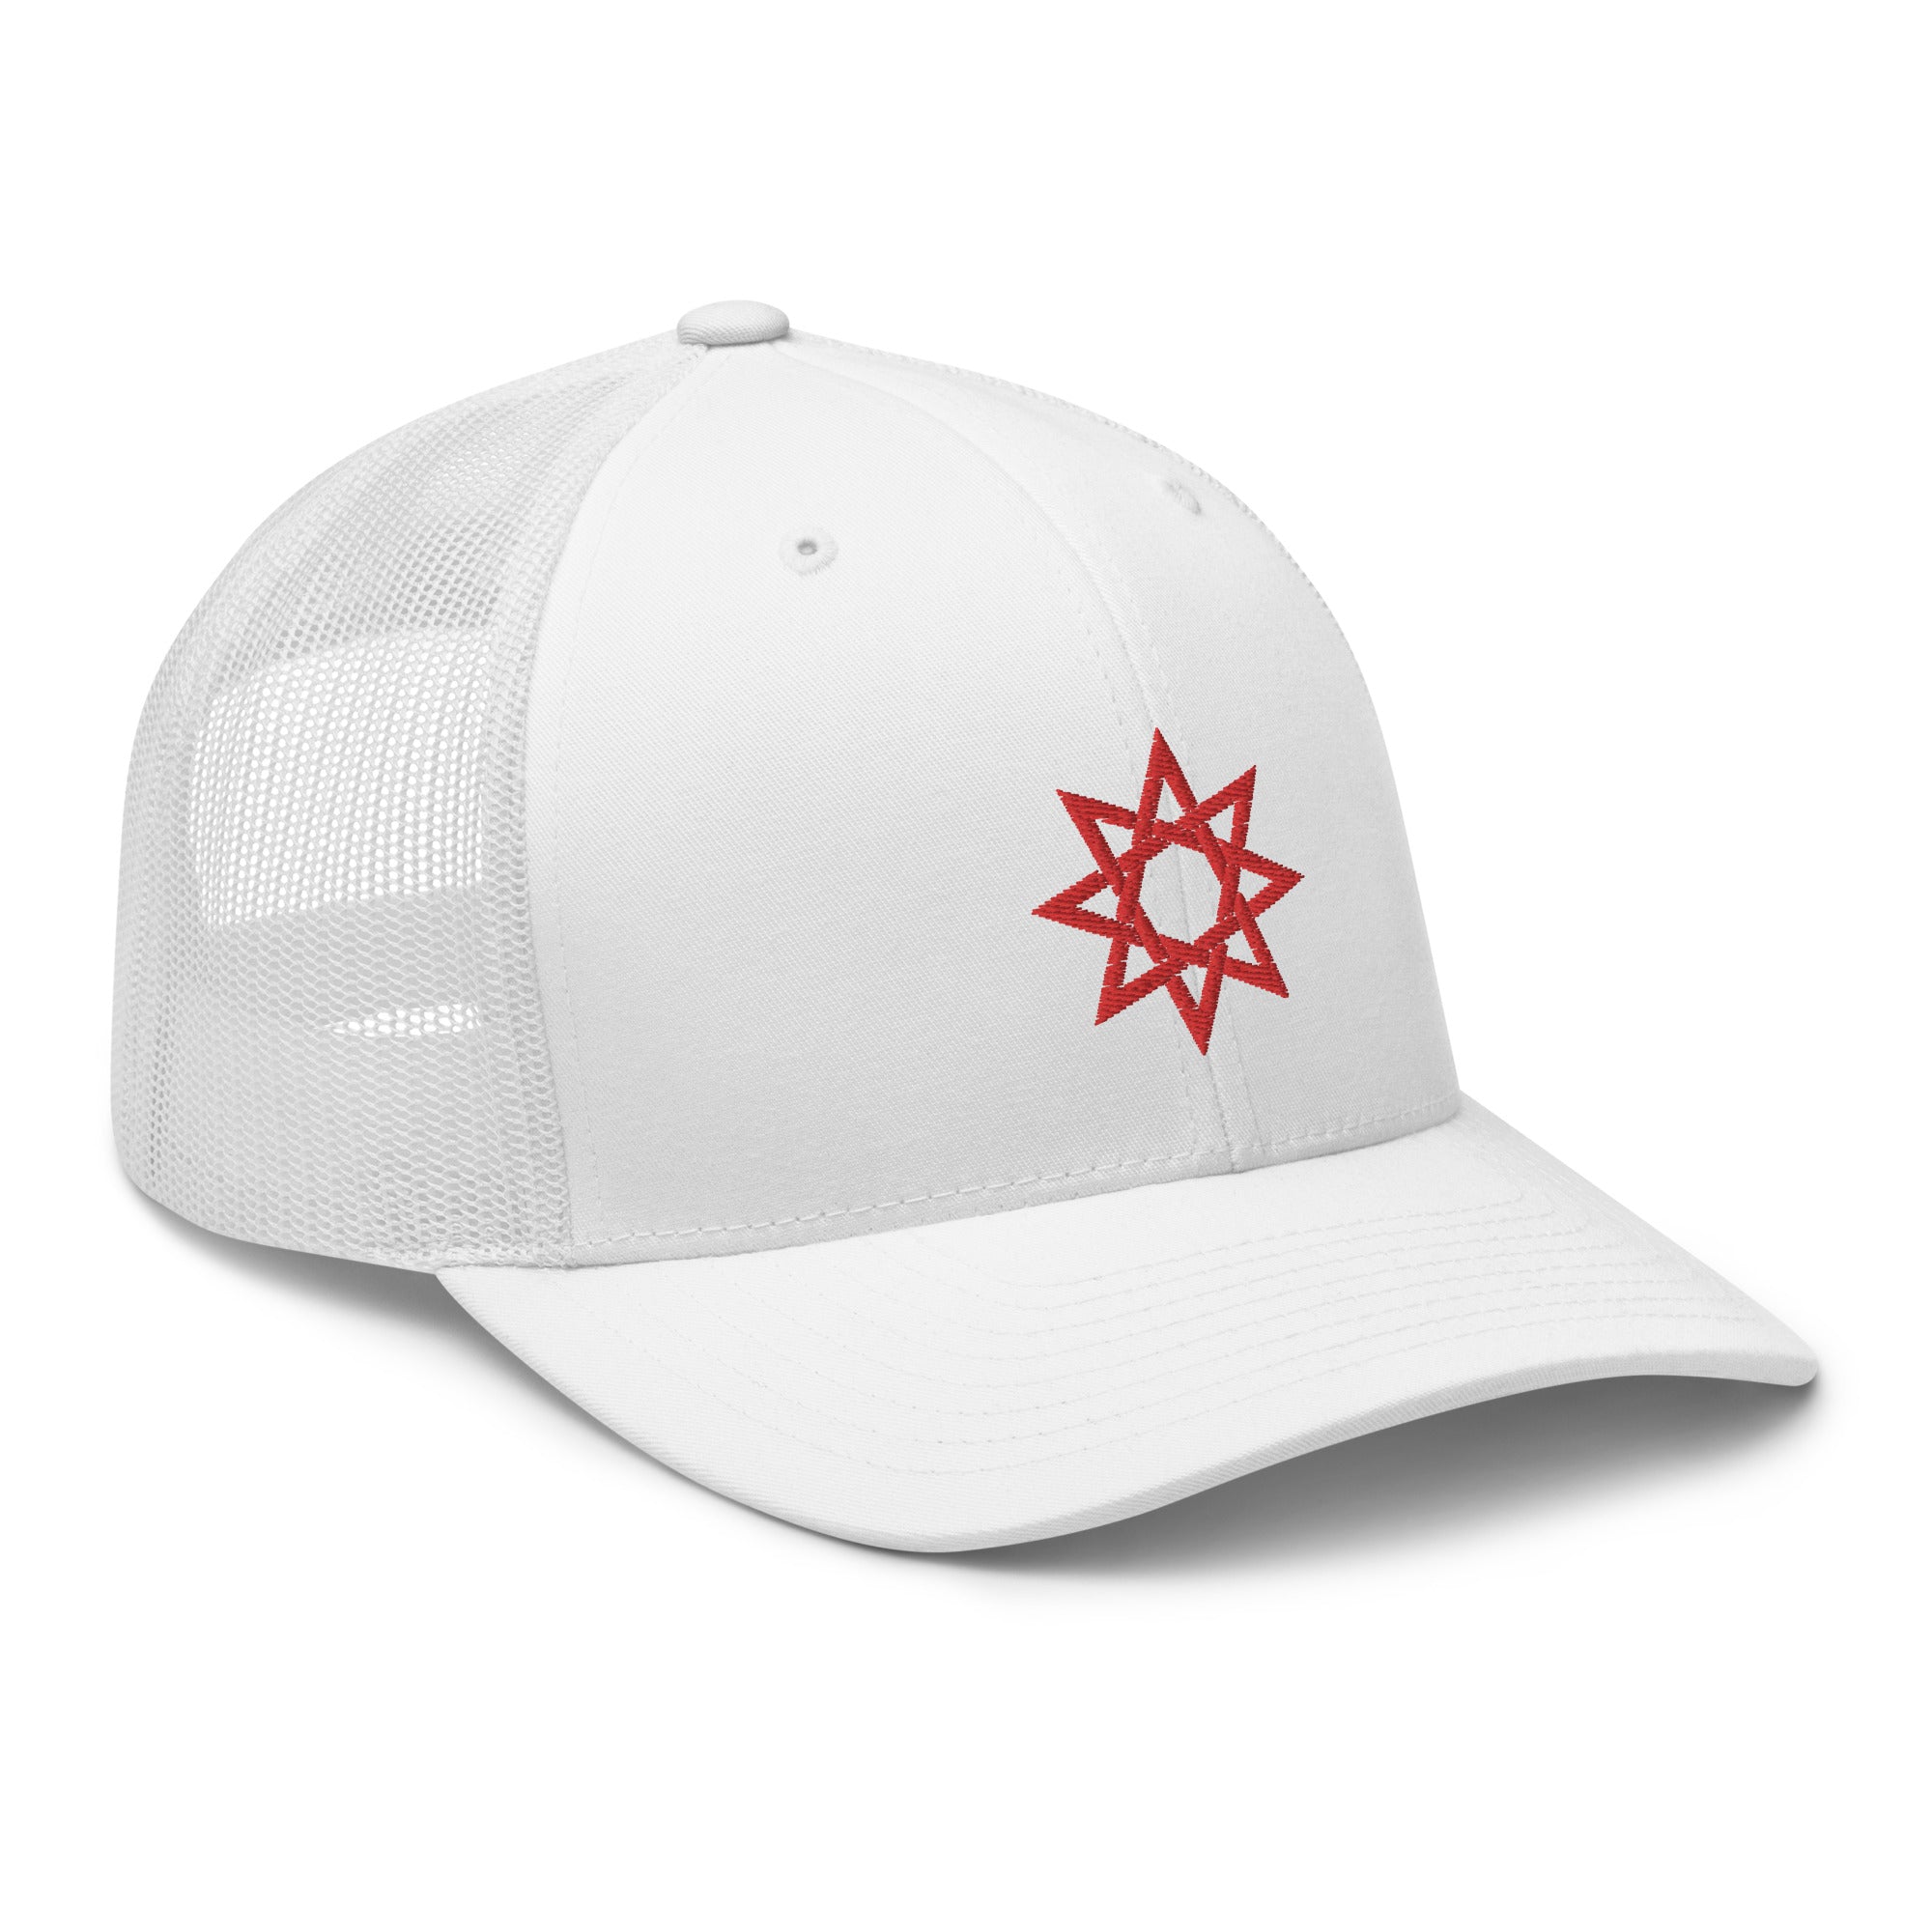 Red 8 Point Star Octagram Anu God Embroidered Retro Trucker Cap Snapback Hat